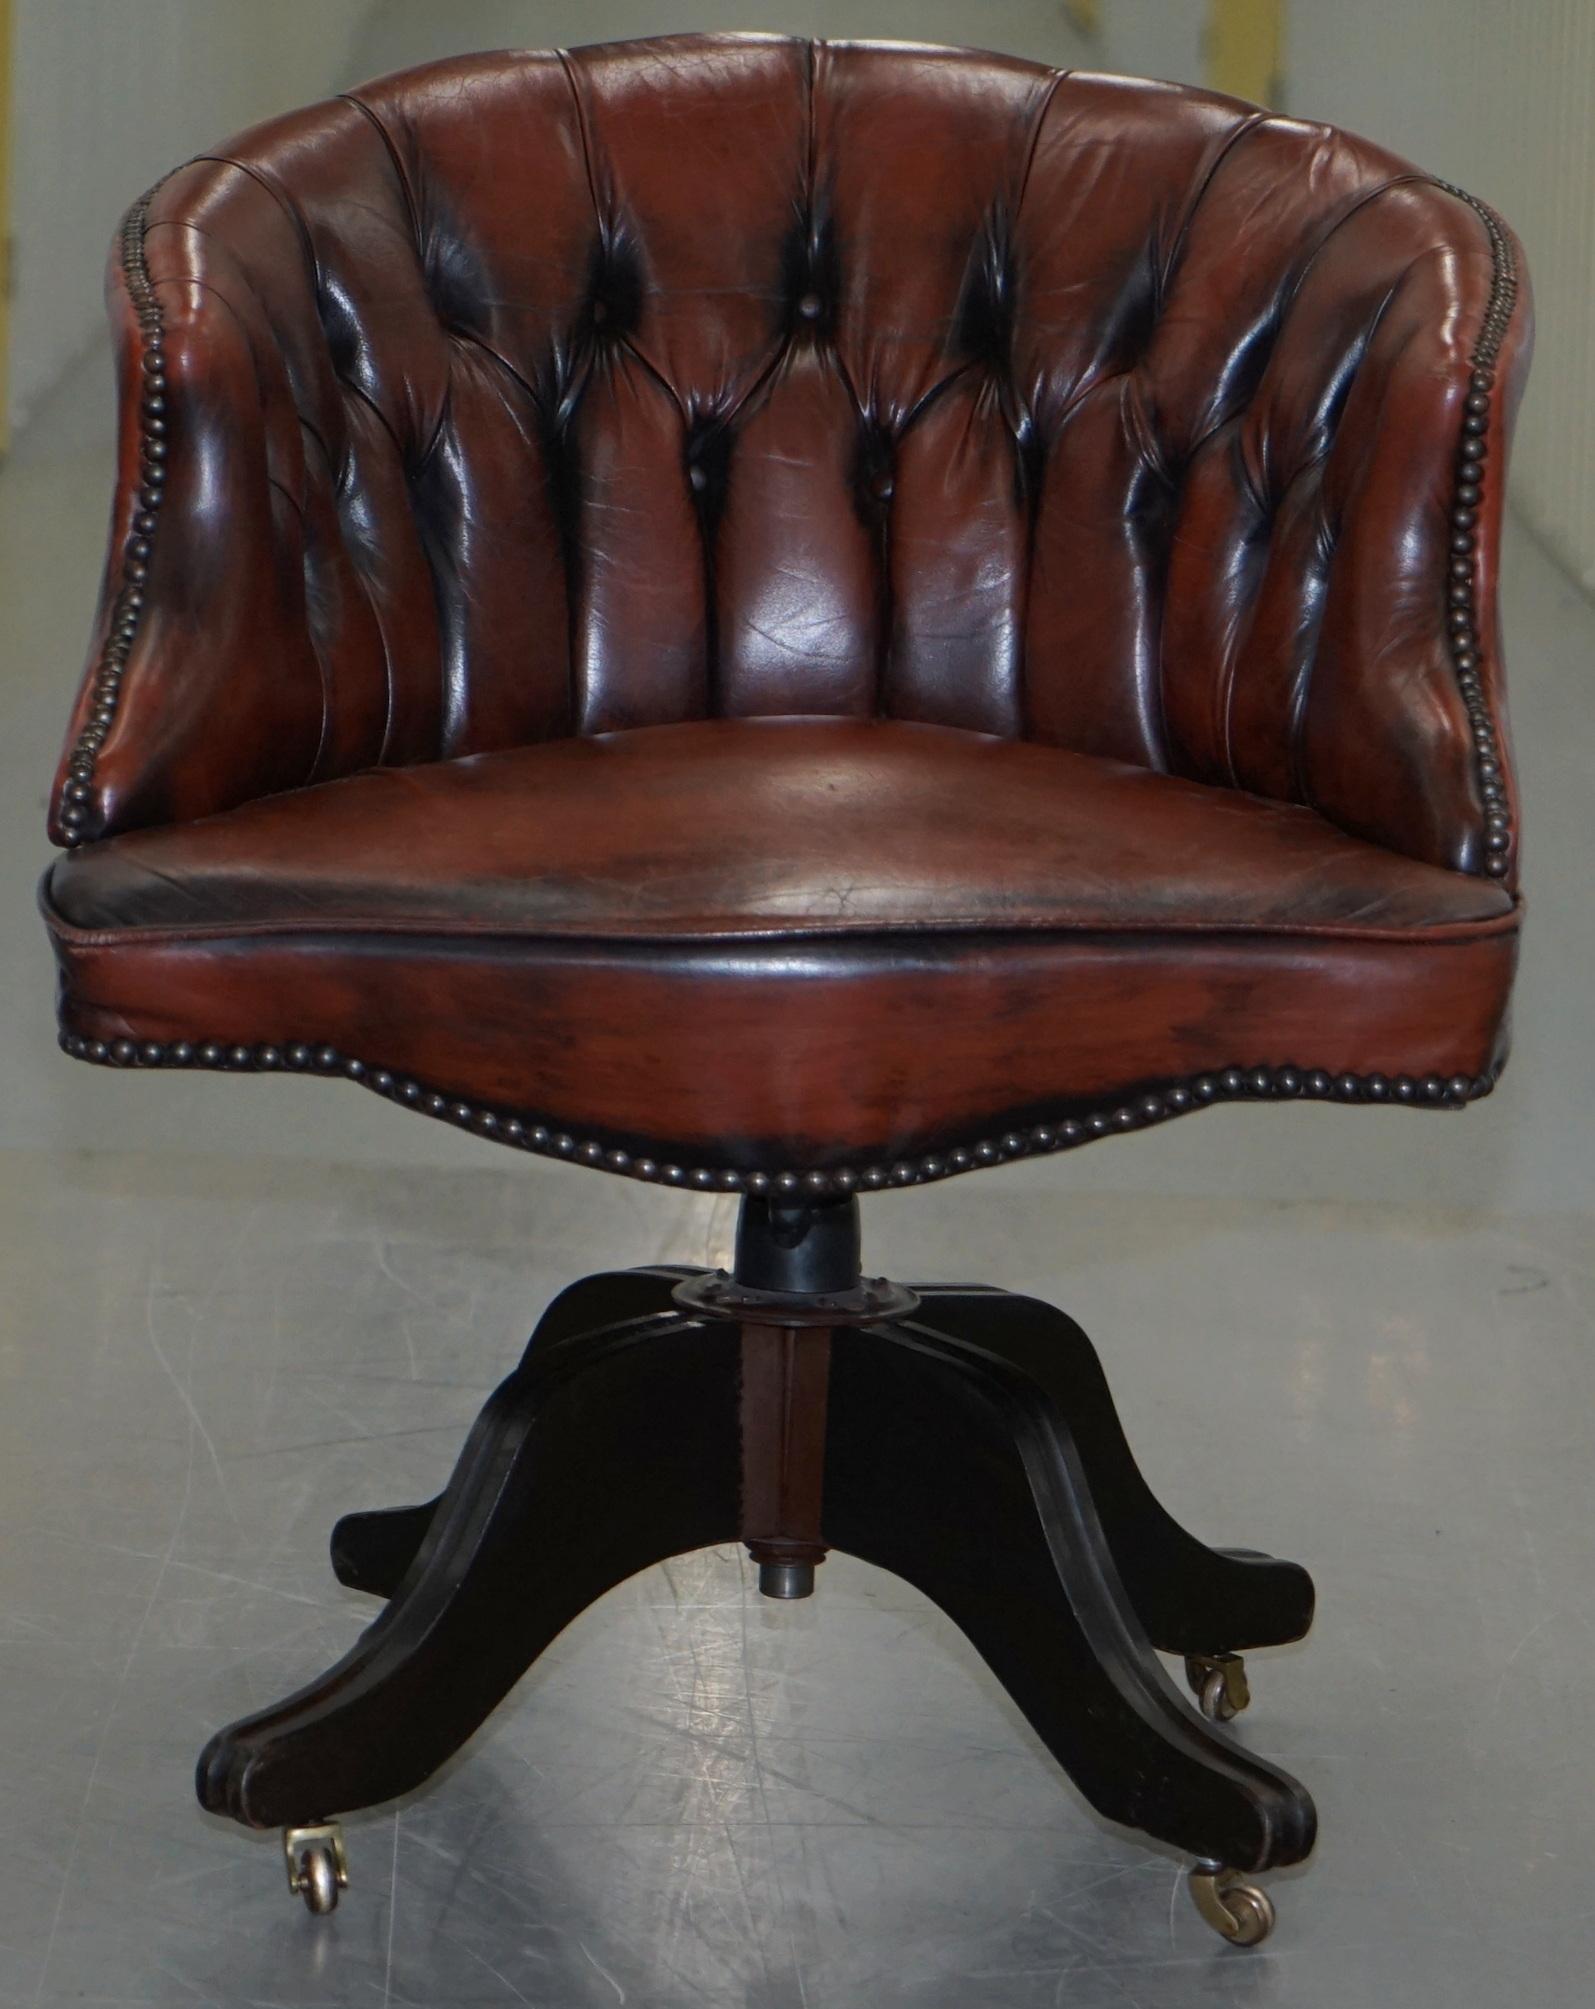 We are delighted to offer for sale this hand made in England 1967 stamped Chesterfield hand dyed brown leather curved back captains chair

This chair is one of a pair, the other is listed under my other items, the only difference is this has a